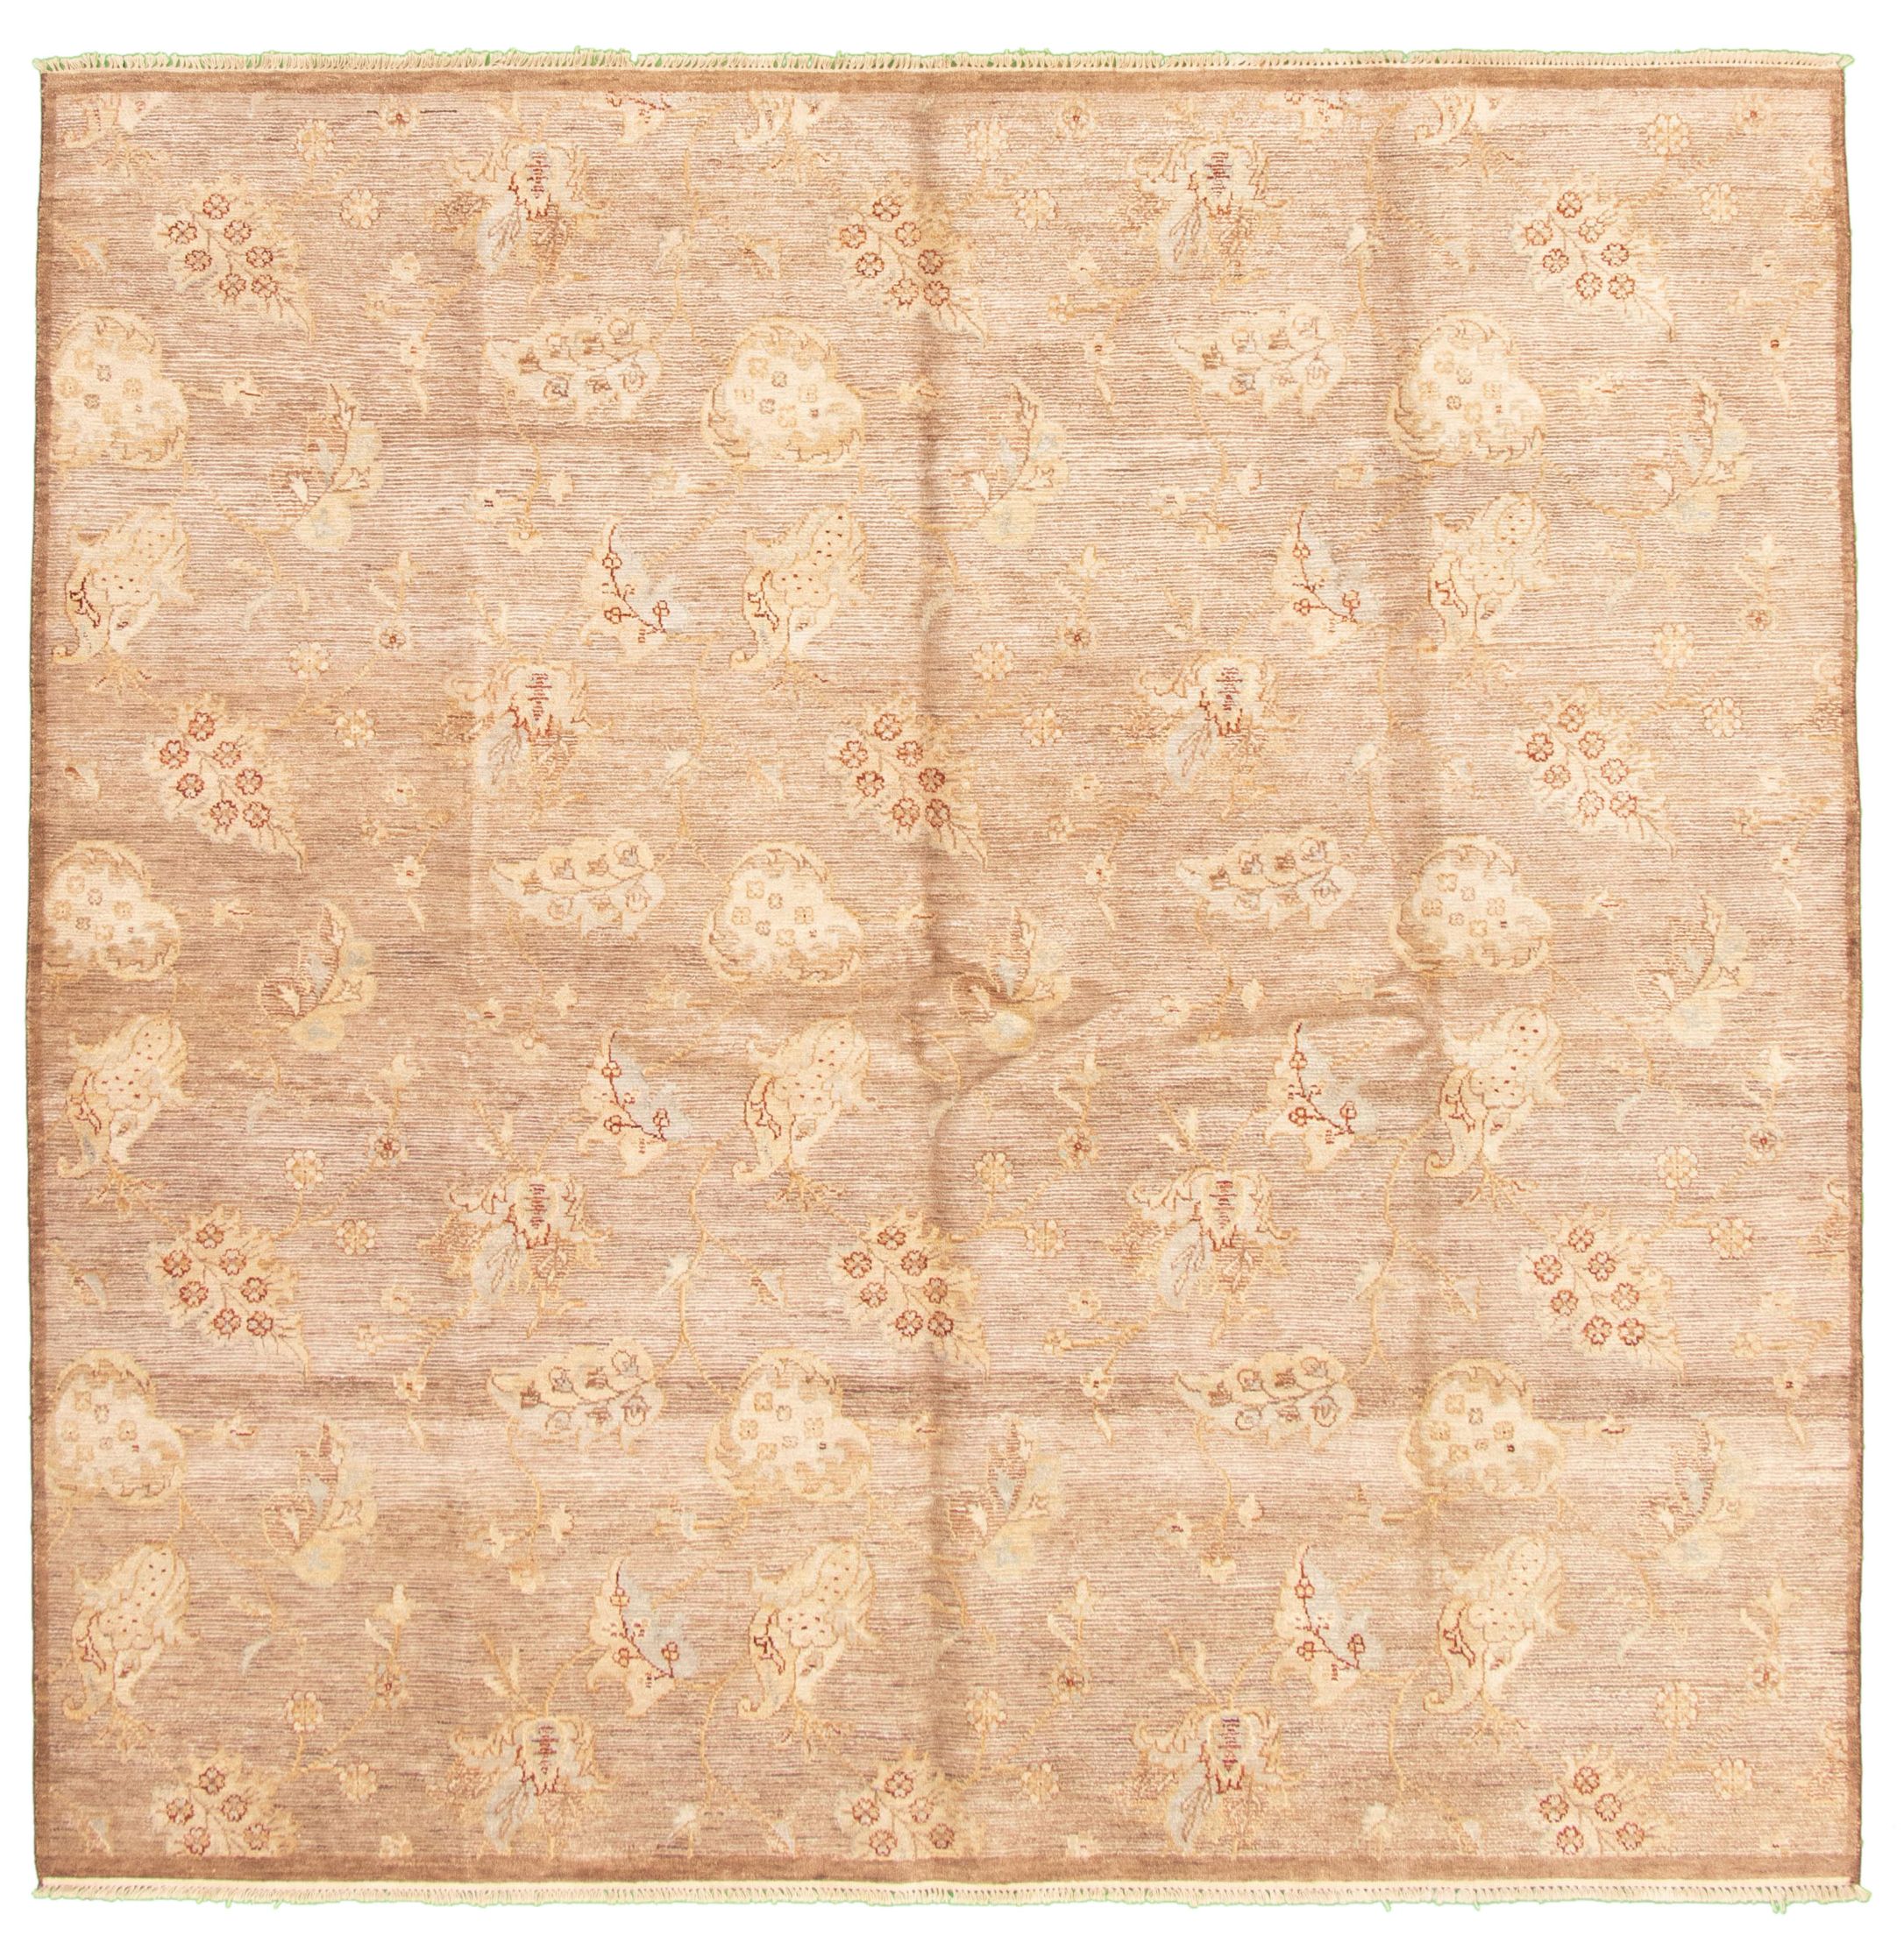 Hand-knotted Harrir Select Brown Wool/Silk Rug 7'9" x 8'0" Size: 7'9" x 8'0"  